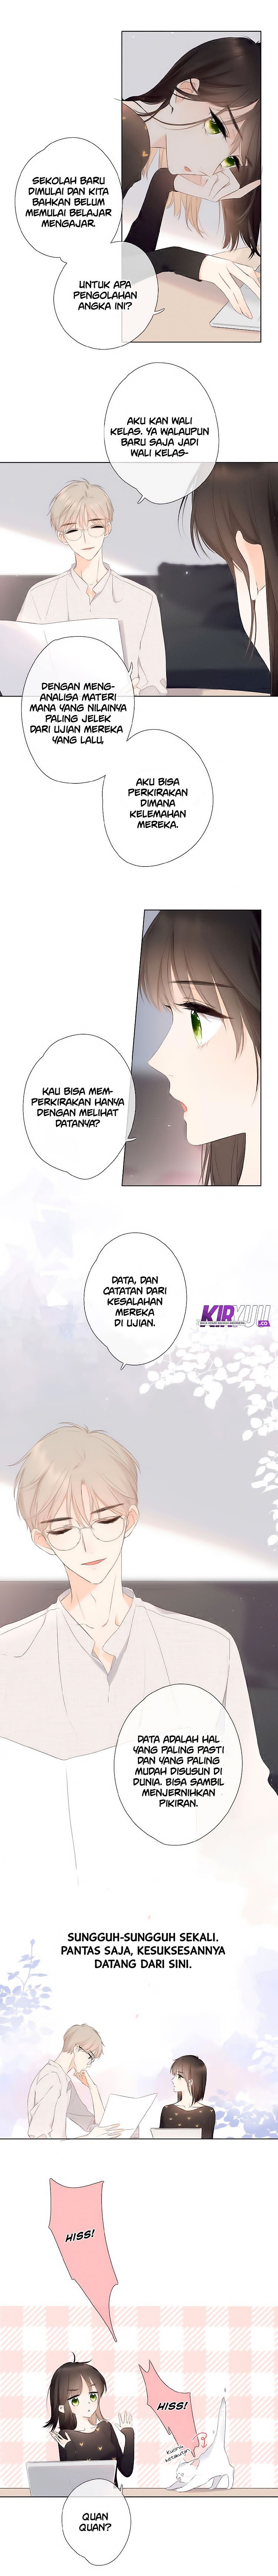 Once More Chapter 04.5